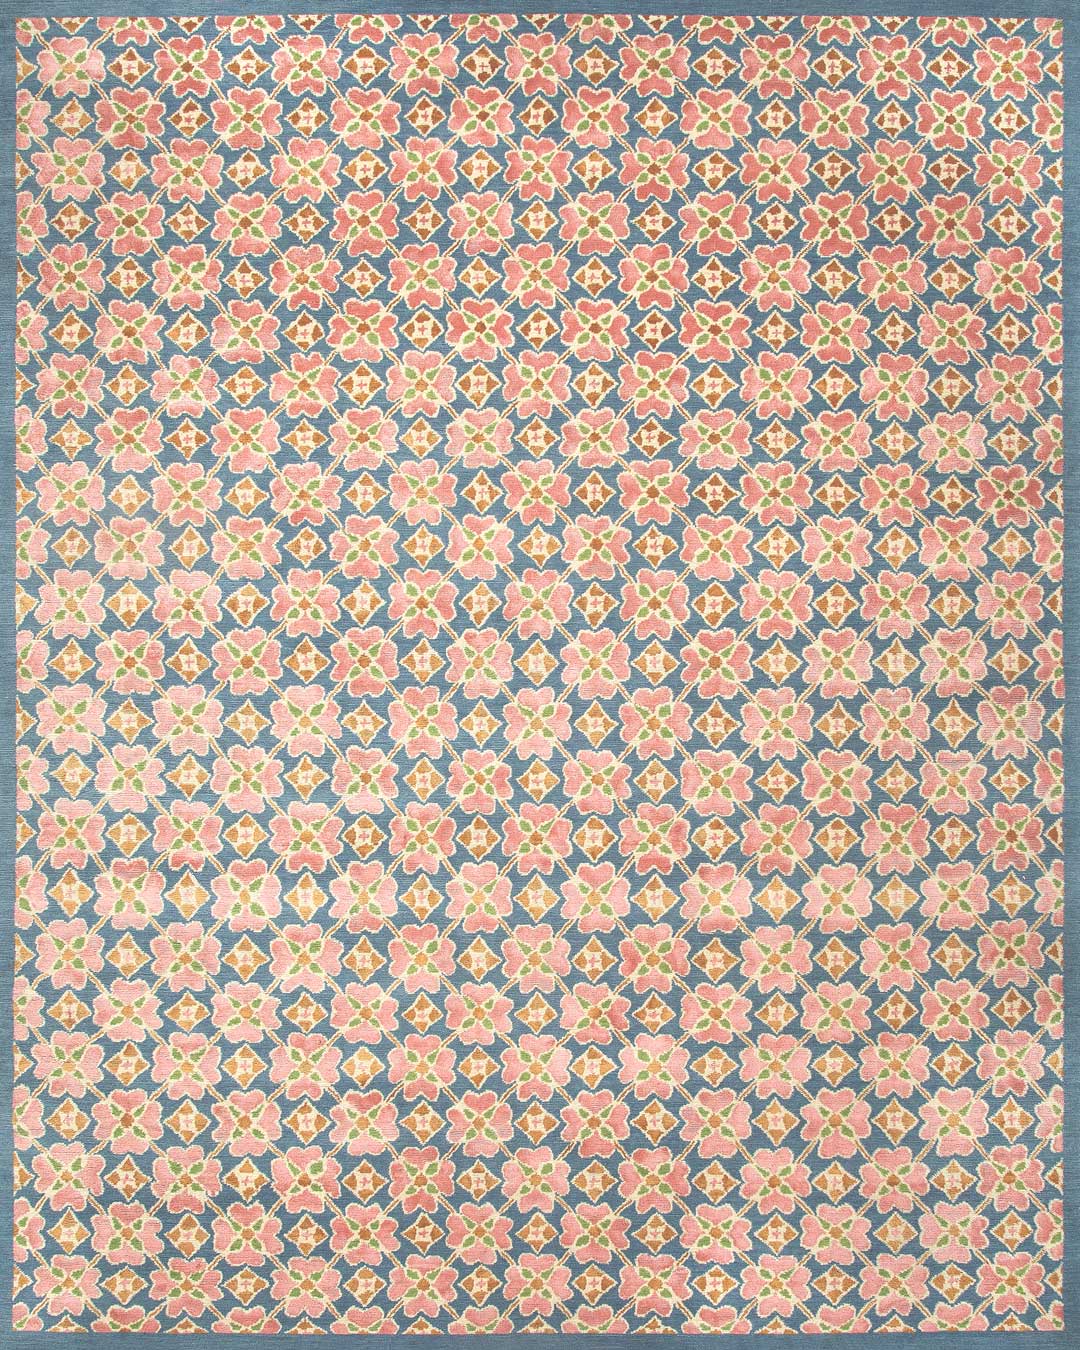 overhead of flora rug by anna spiro in floral repeat pattern with a blue border